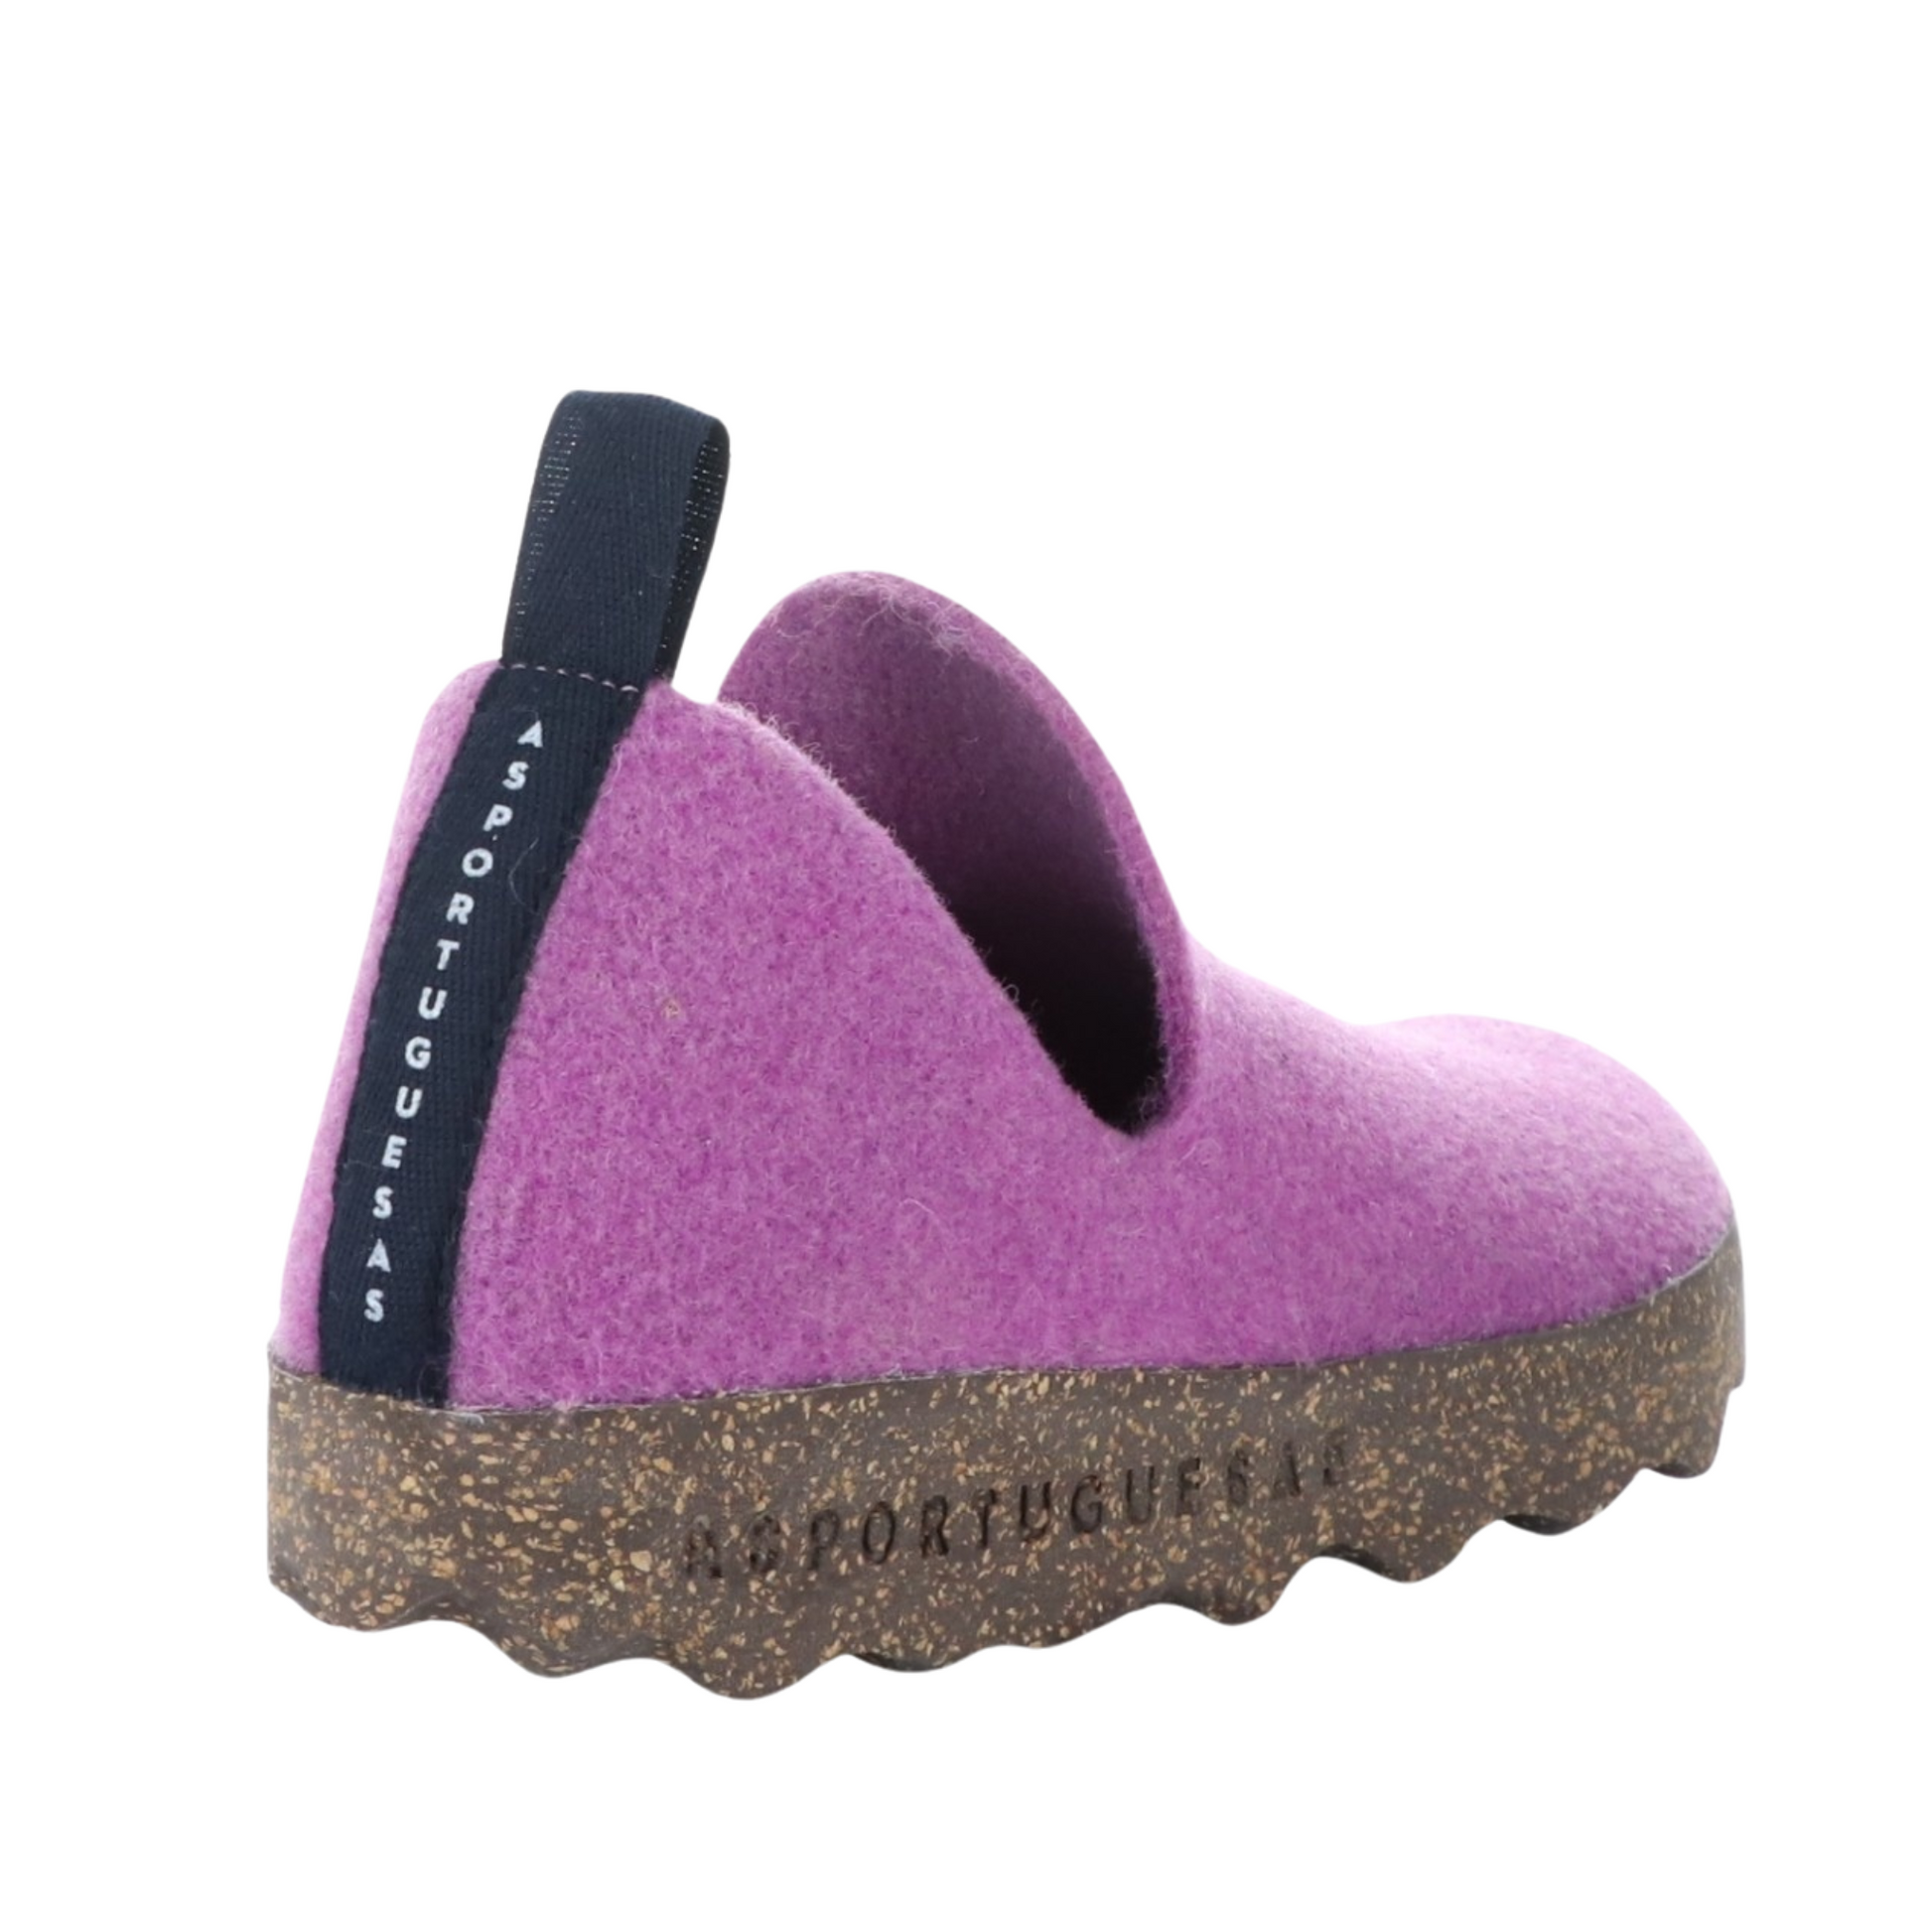 A pink wool sneaker with oblong cutouts, navy heel tab, and toffee cork soul is pictured from the back. "asportuguesas" is written vertically along the heel tab and in relief in the sole.